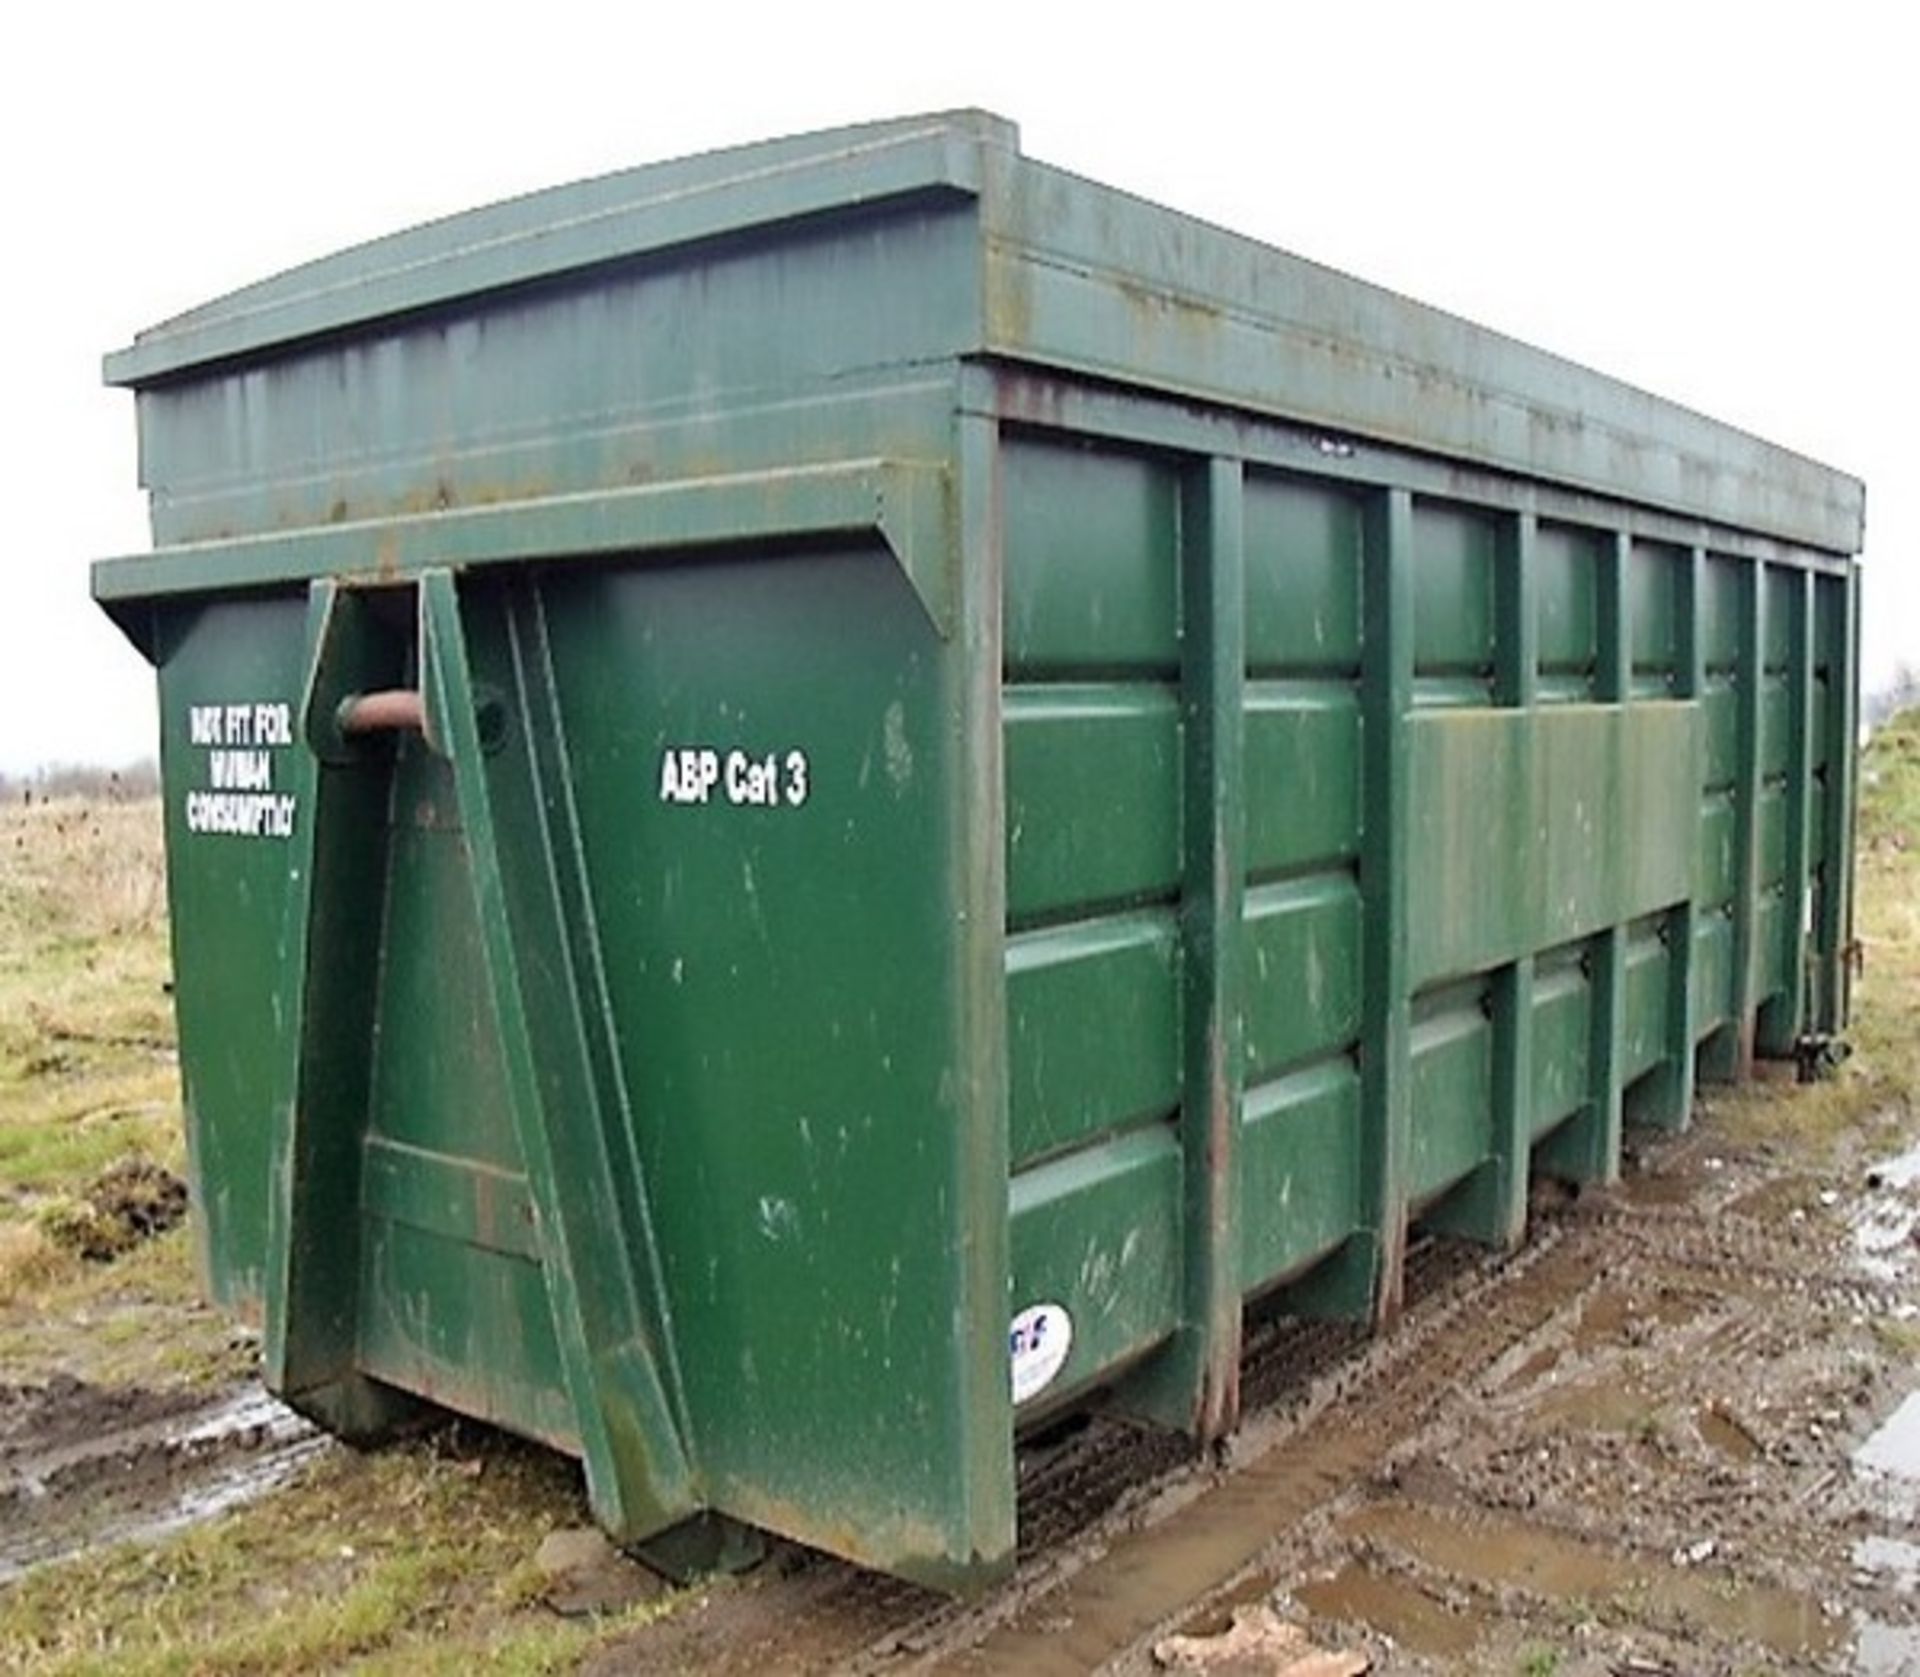 FOOD WASTE SKIP C/W ENCLOSED TOP. MANUFACTURED BY C F BOOTH. SOLD FROM ERROL AUCTION SITE. VIEWING A